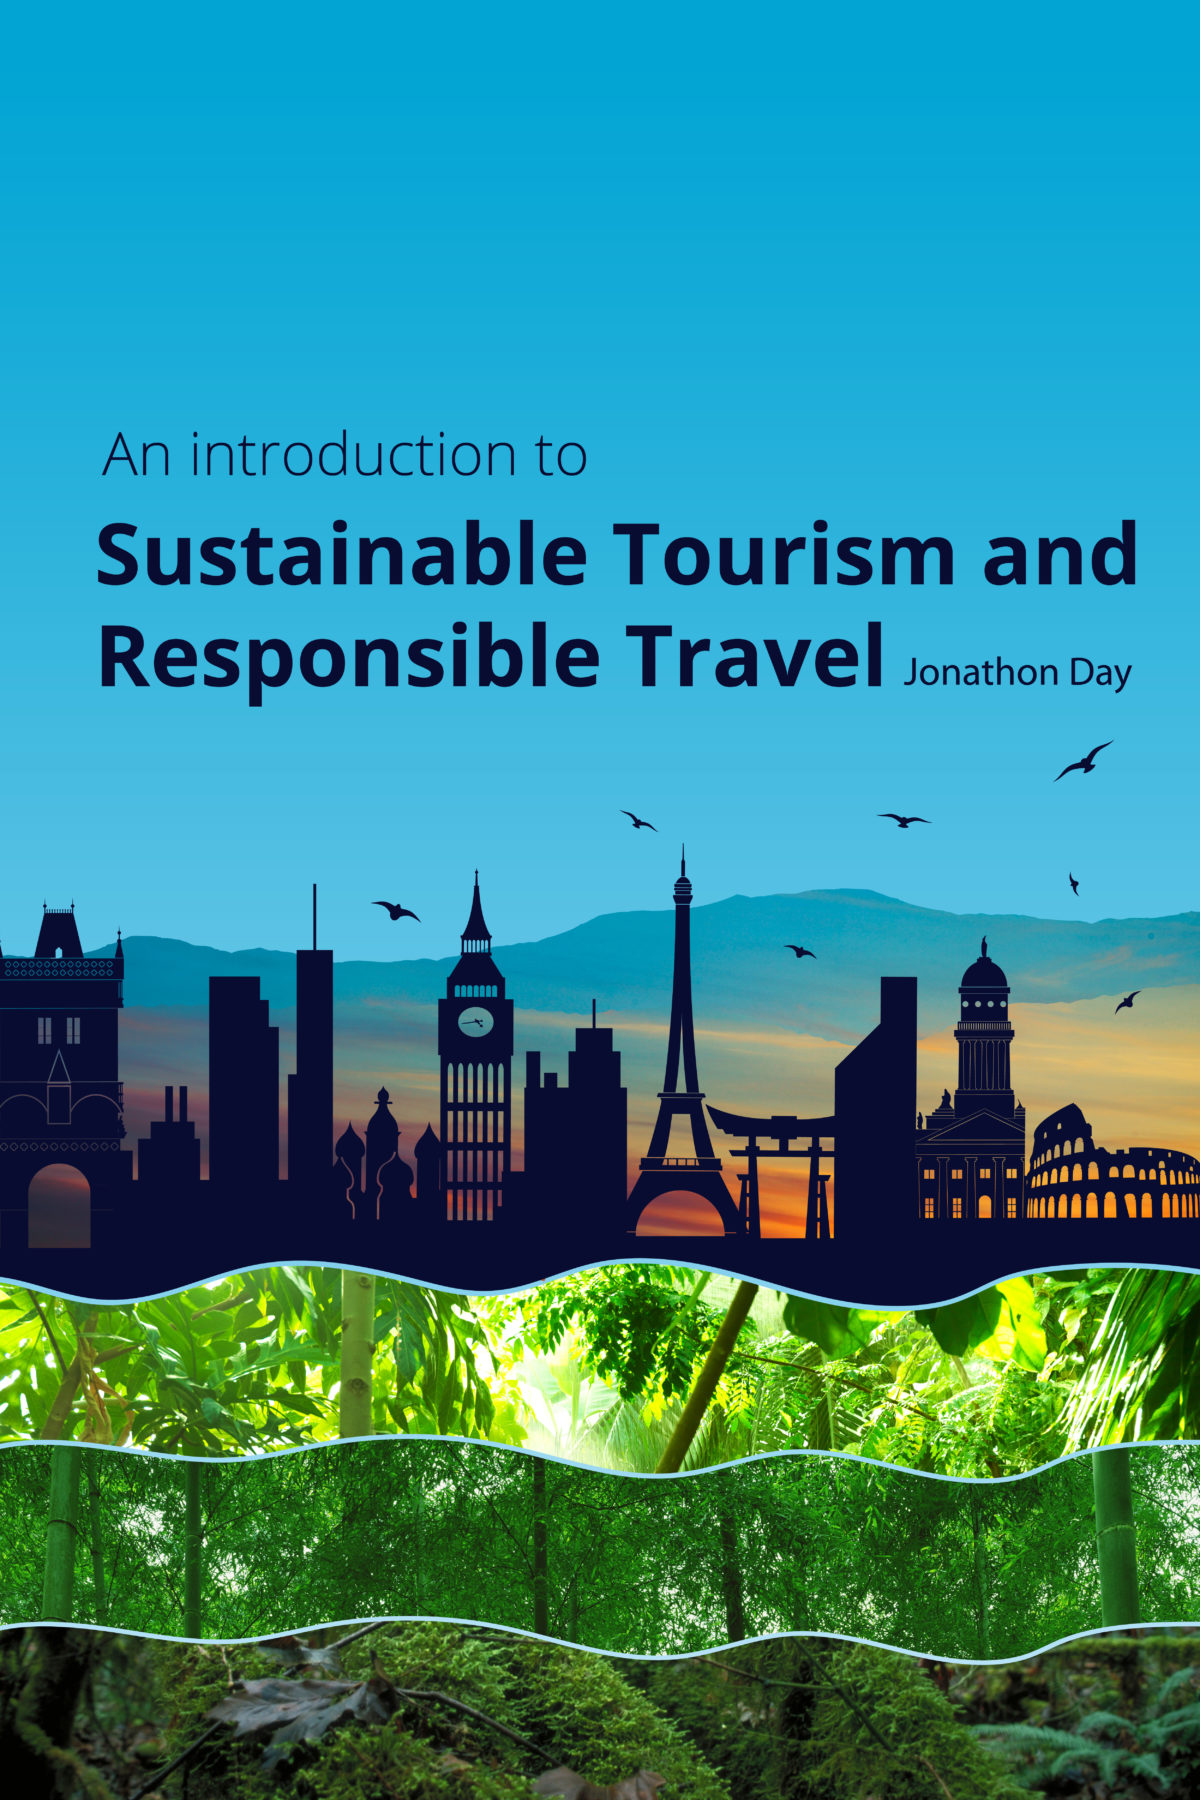 about sustainable tourism and responsible travel